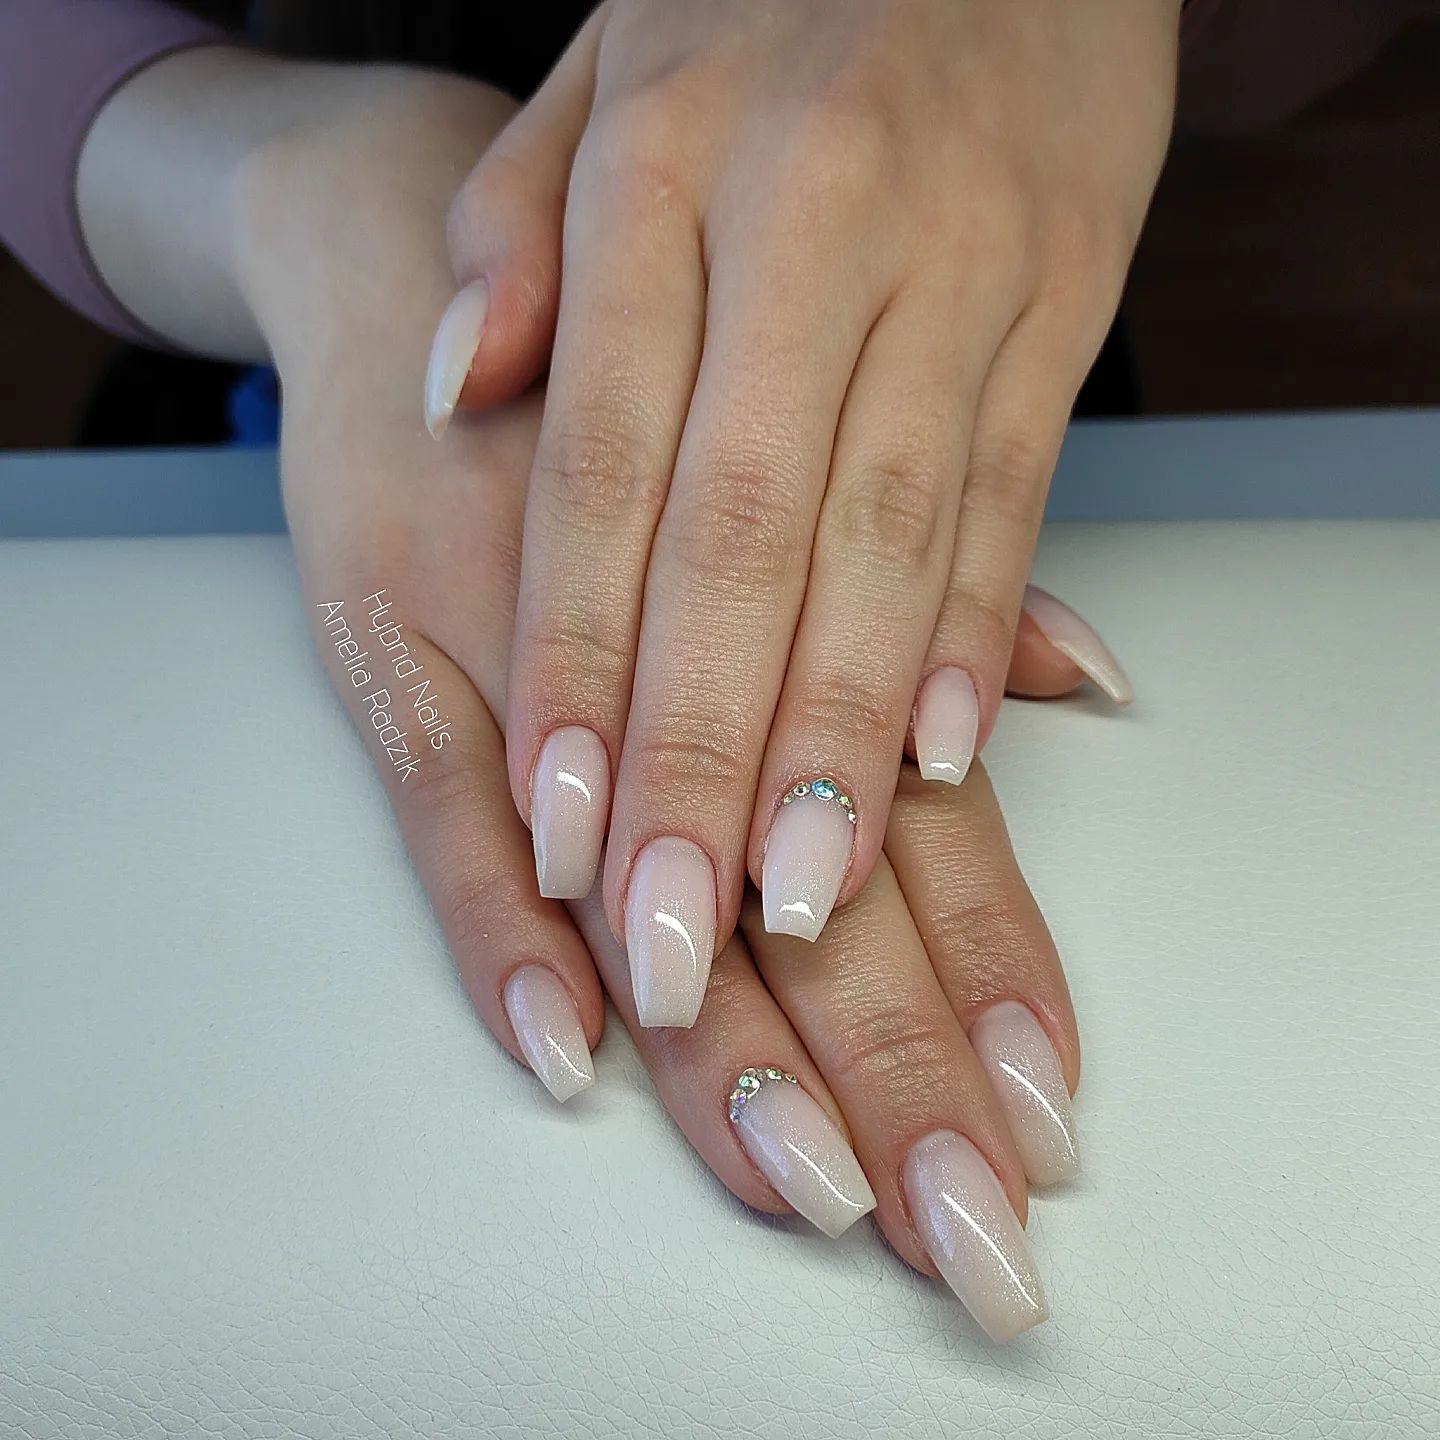 Cute Spring Nails That Will Never Go Out Of Style : Milky nails with gold  foil accent design